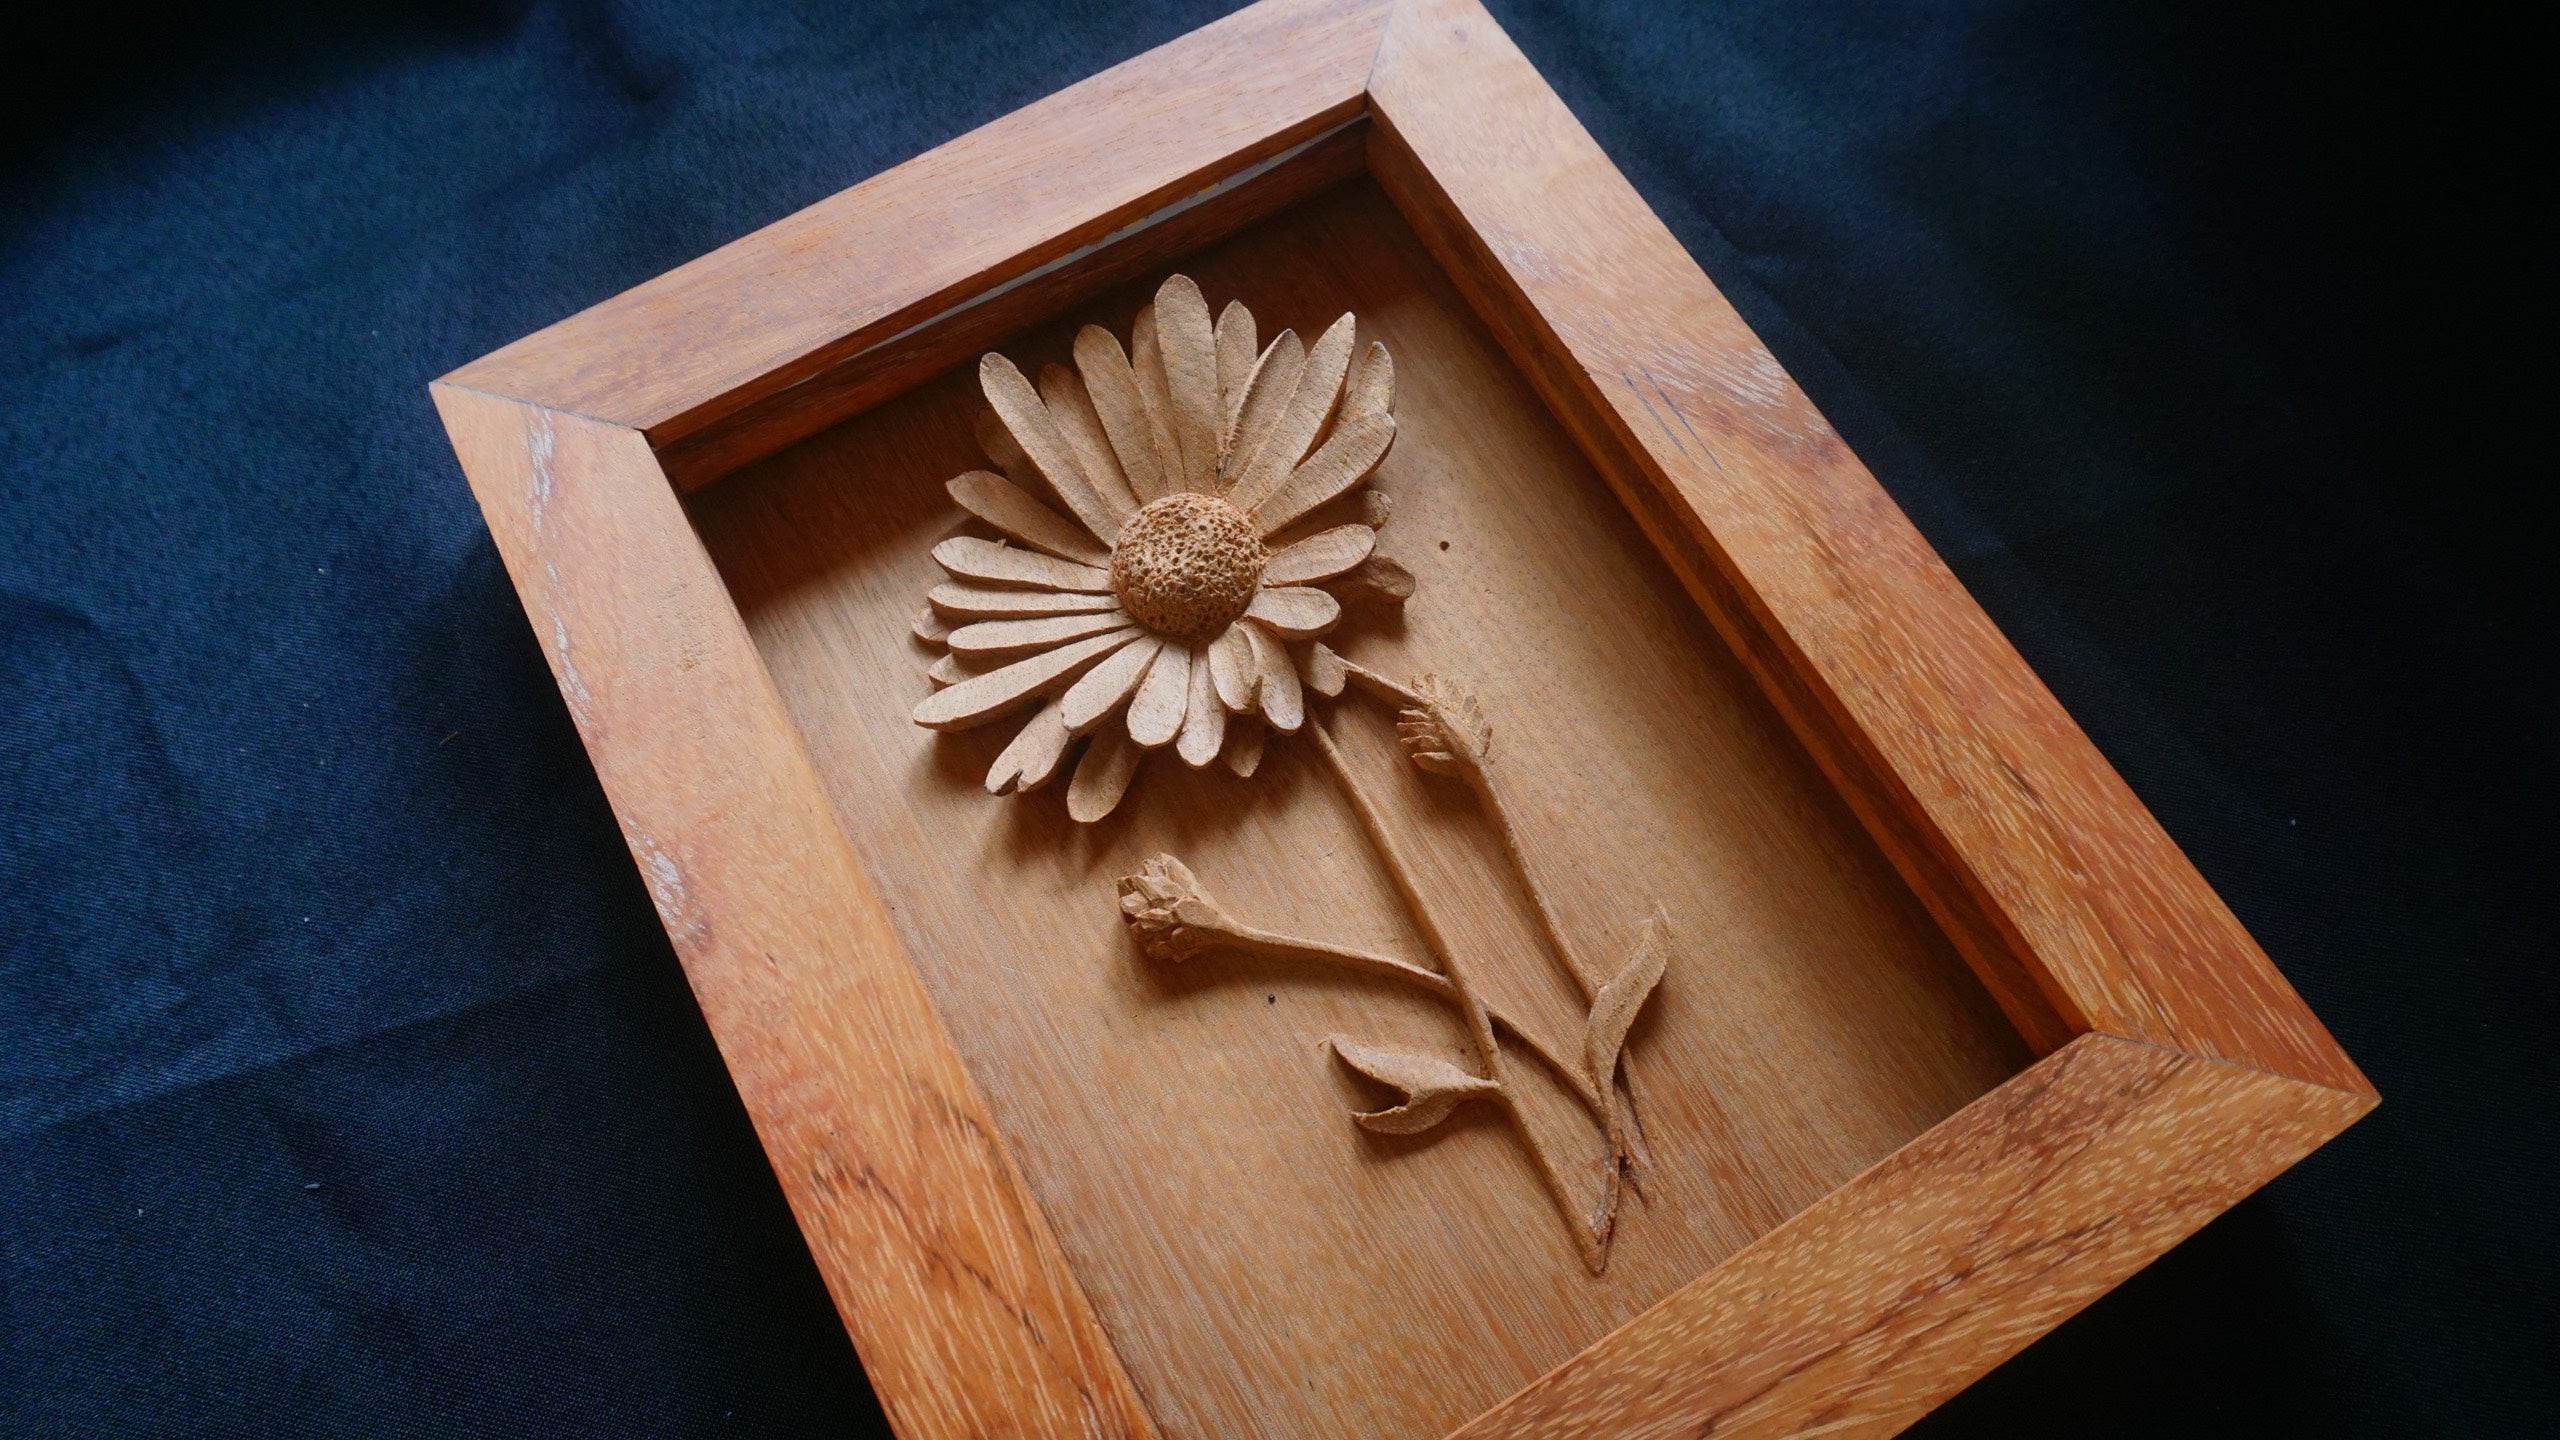 Daisy Flower wood Carving